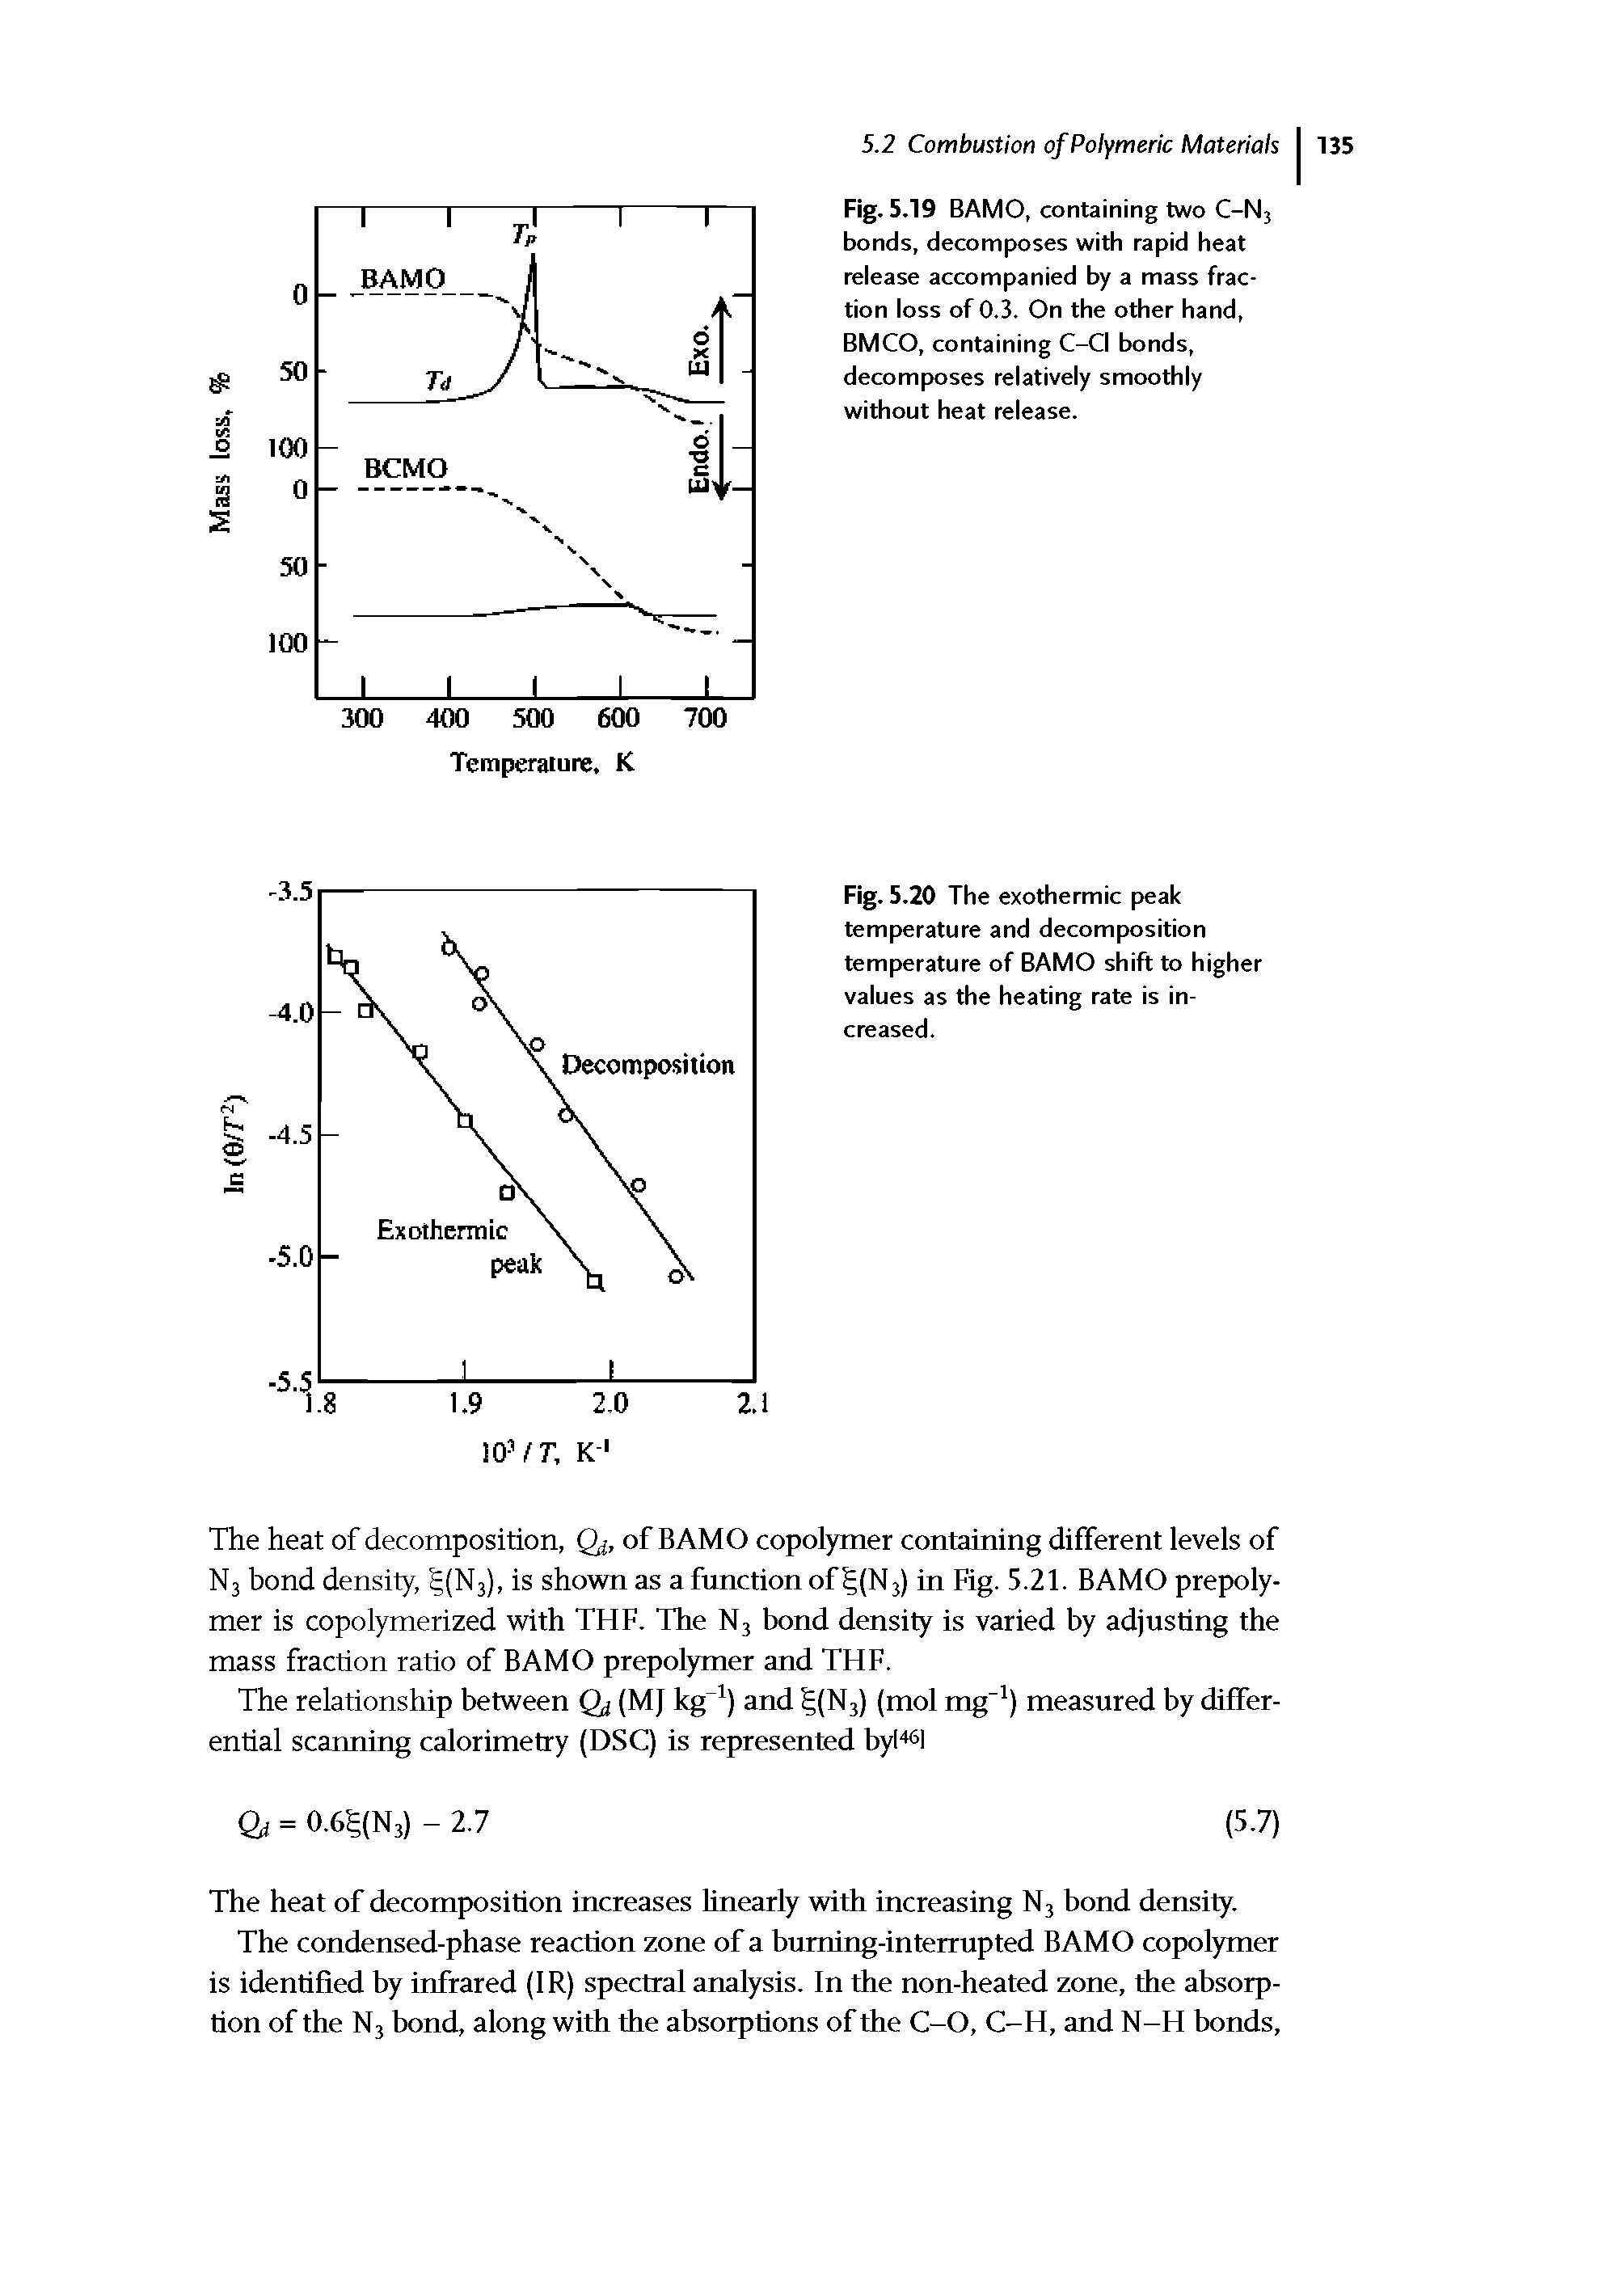 Fig. 5.19 BAMO, containing two C-N3 bonds, decomposes with rapid heat release accompanied by a mass fraction loss of 0.3. On the other hand, BMCO, containing C-CI bonds, decomposes relatively smoothly without heat release.